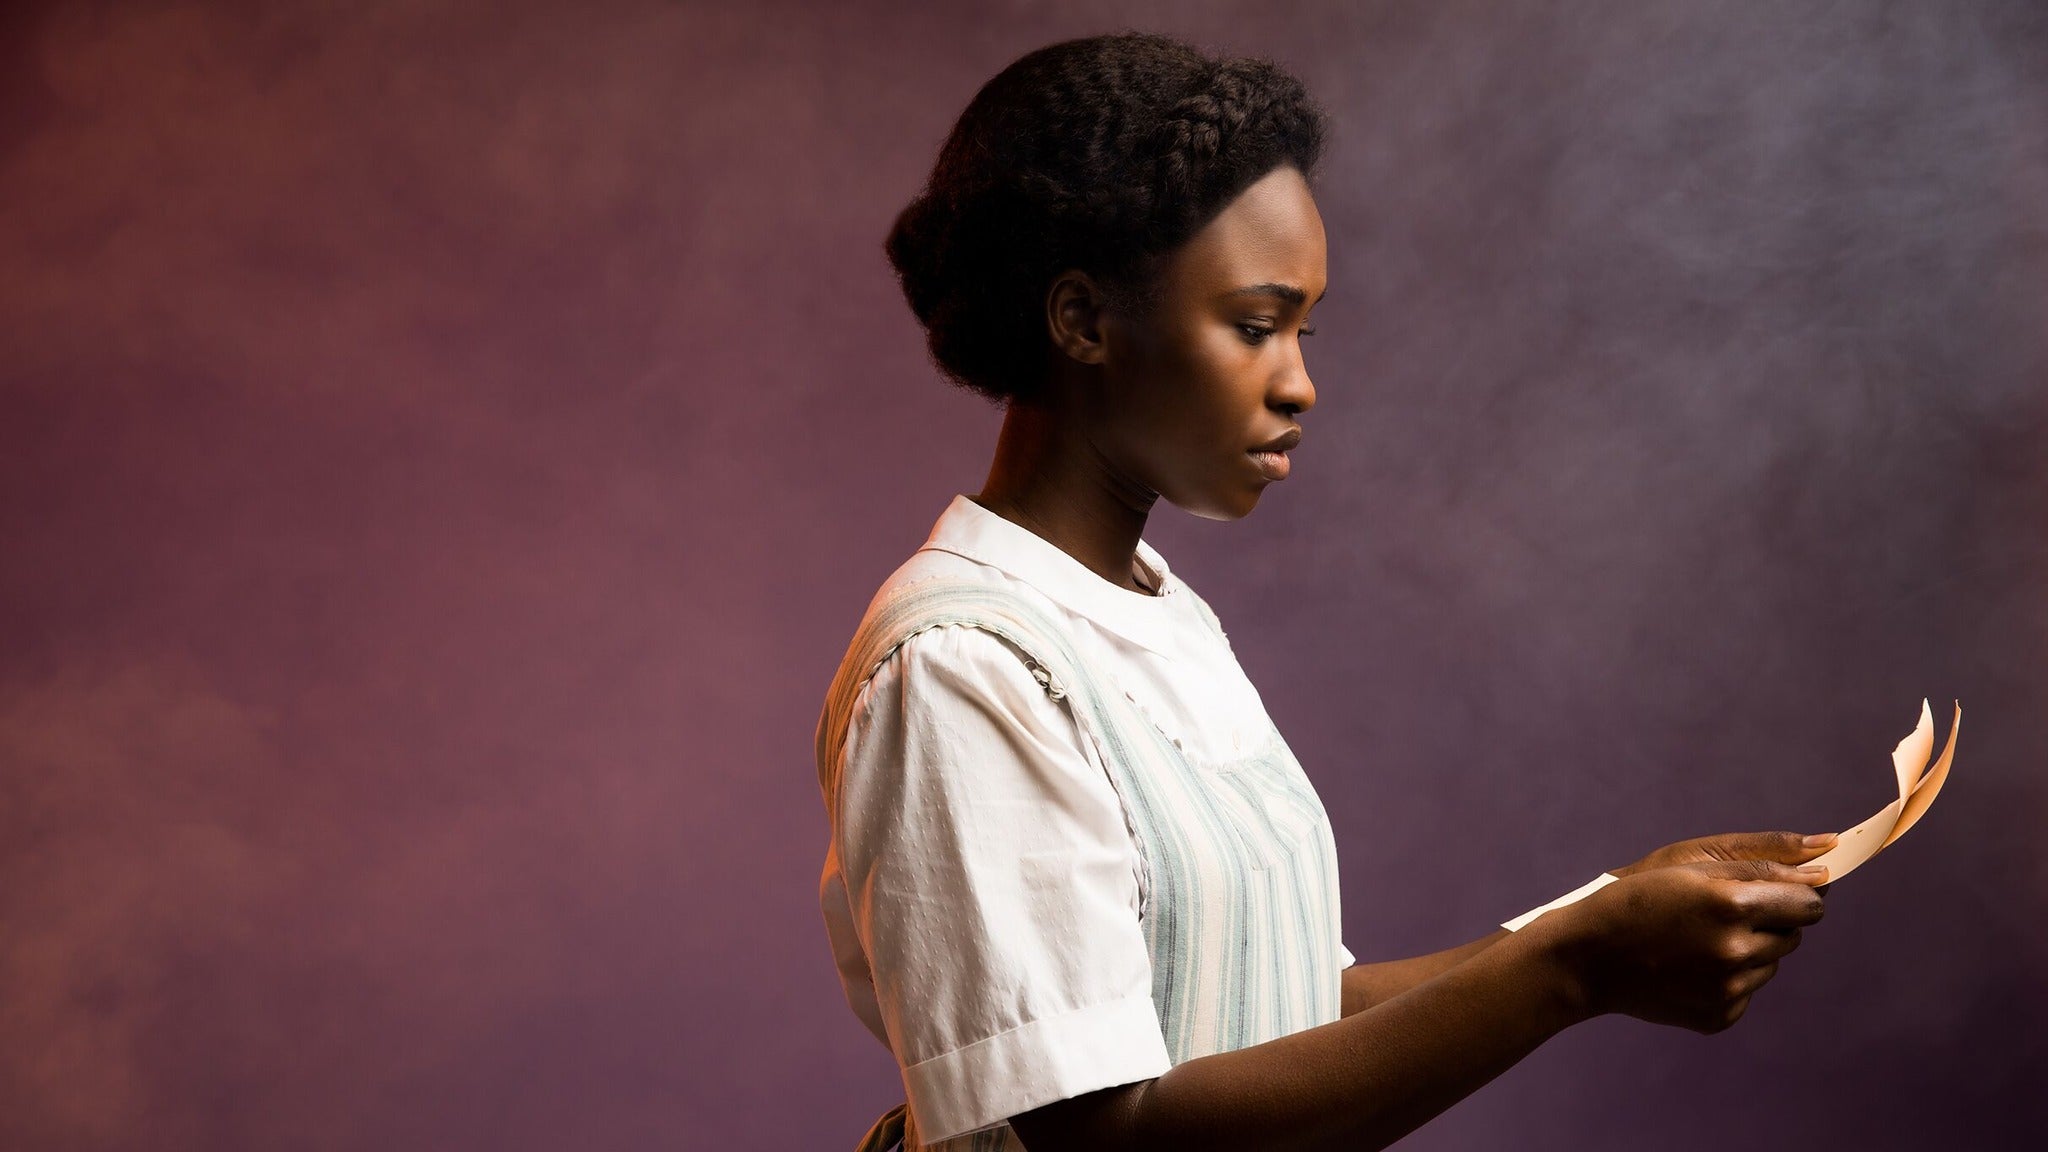 Indiana Performing Arts Theatre Presents The Color Purple in Fort Wayne promo photo for Embassy Member presale offer code